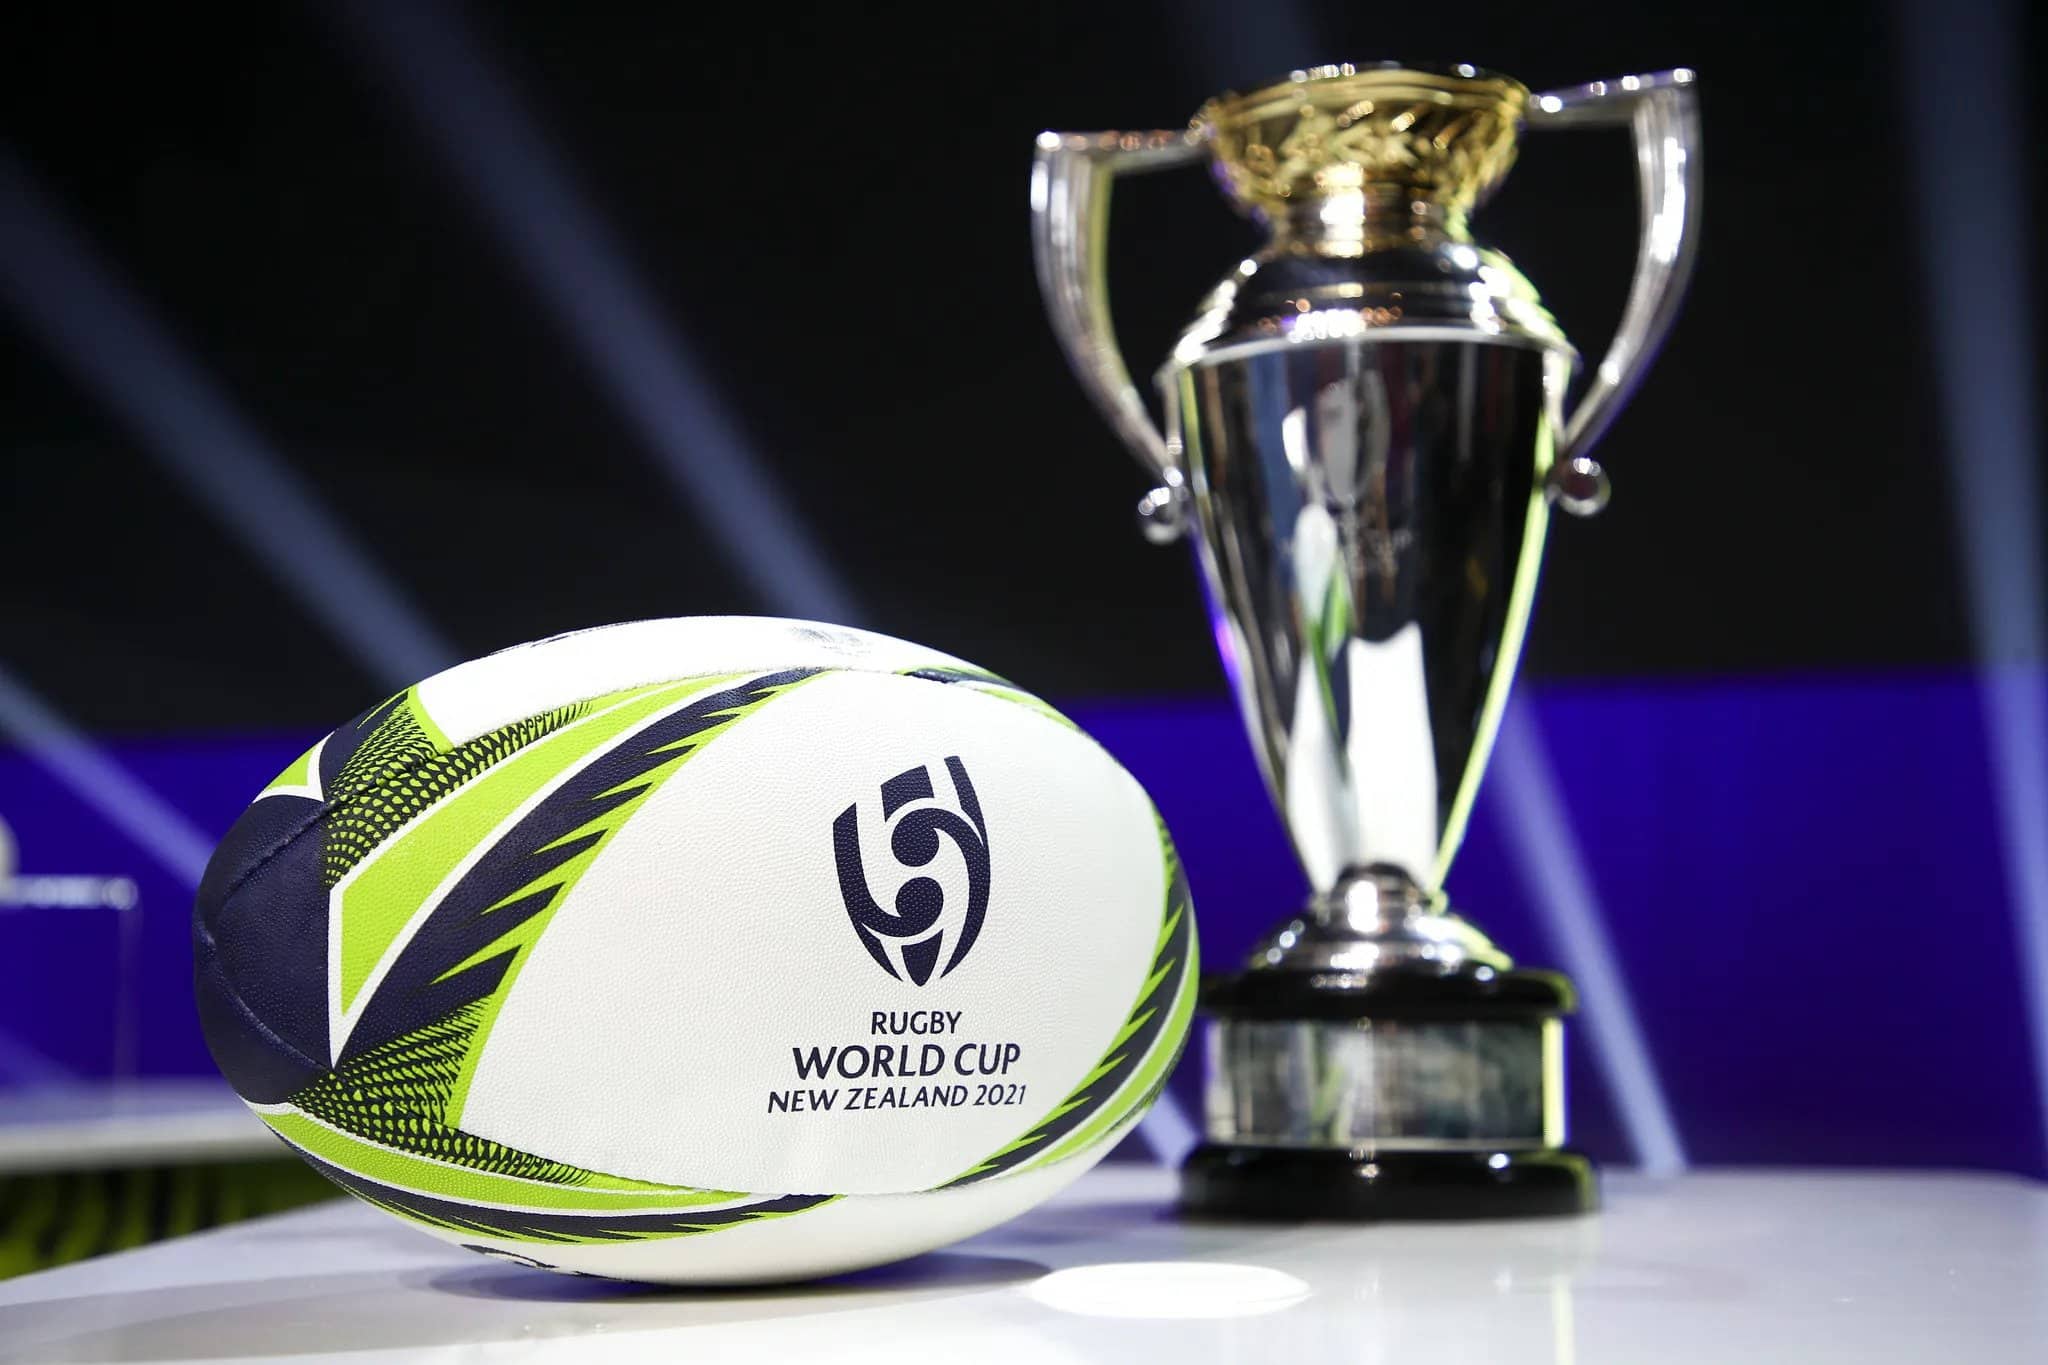 Rugby world cup and ball